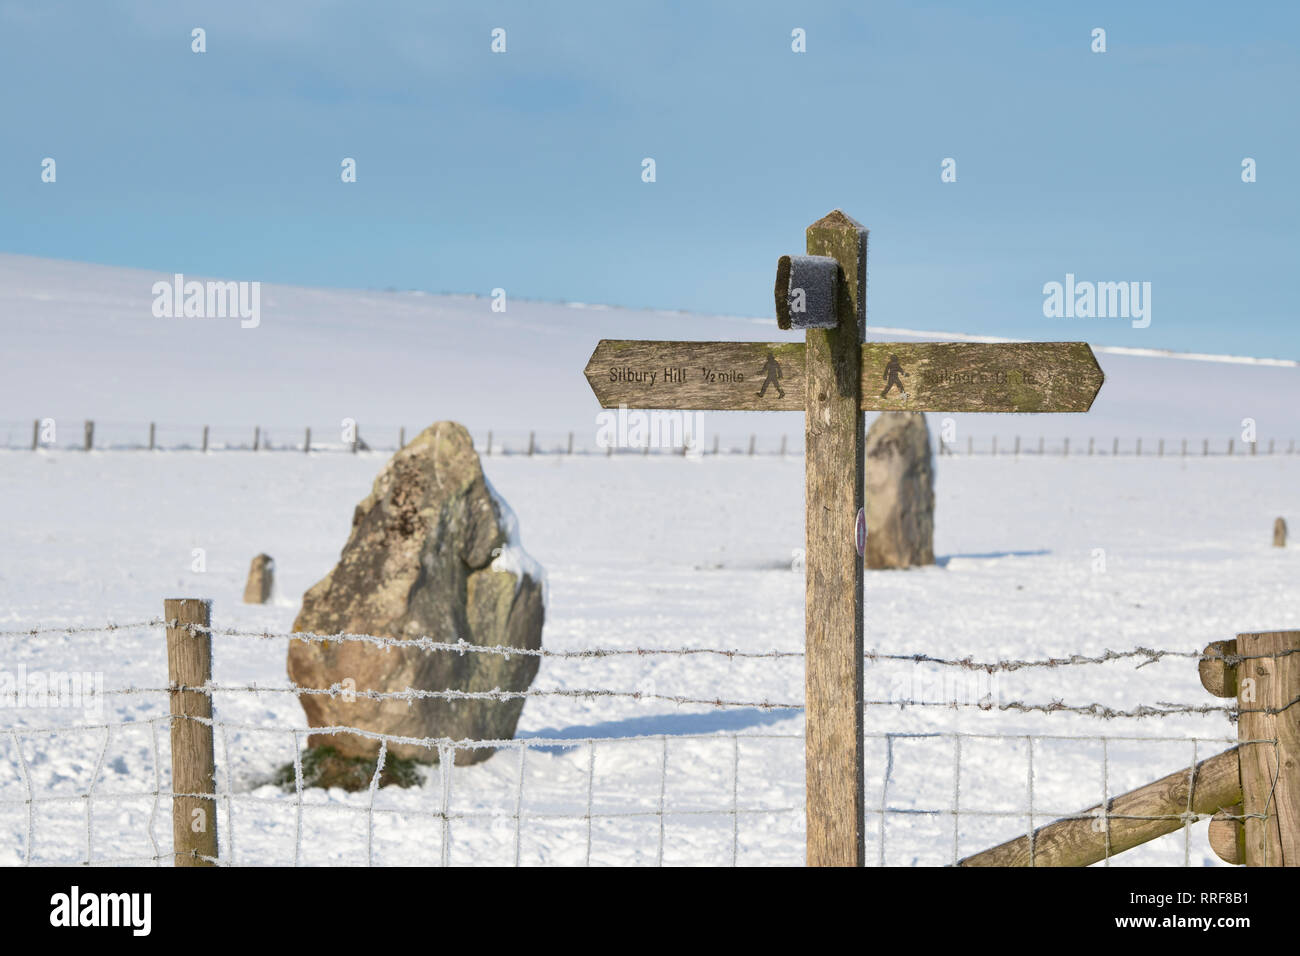 Silbury hill walking signpost in the winter snow just after sunrise. Avebury, Wiltshire, England Stock Photo